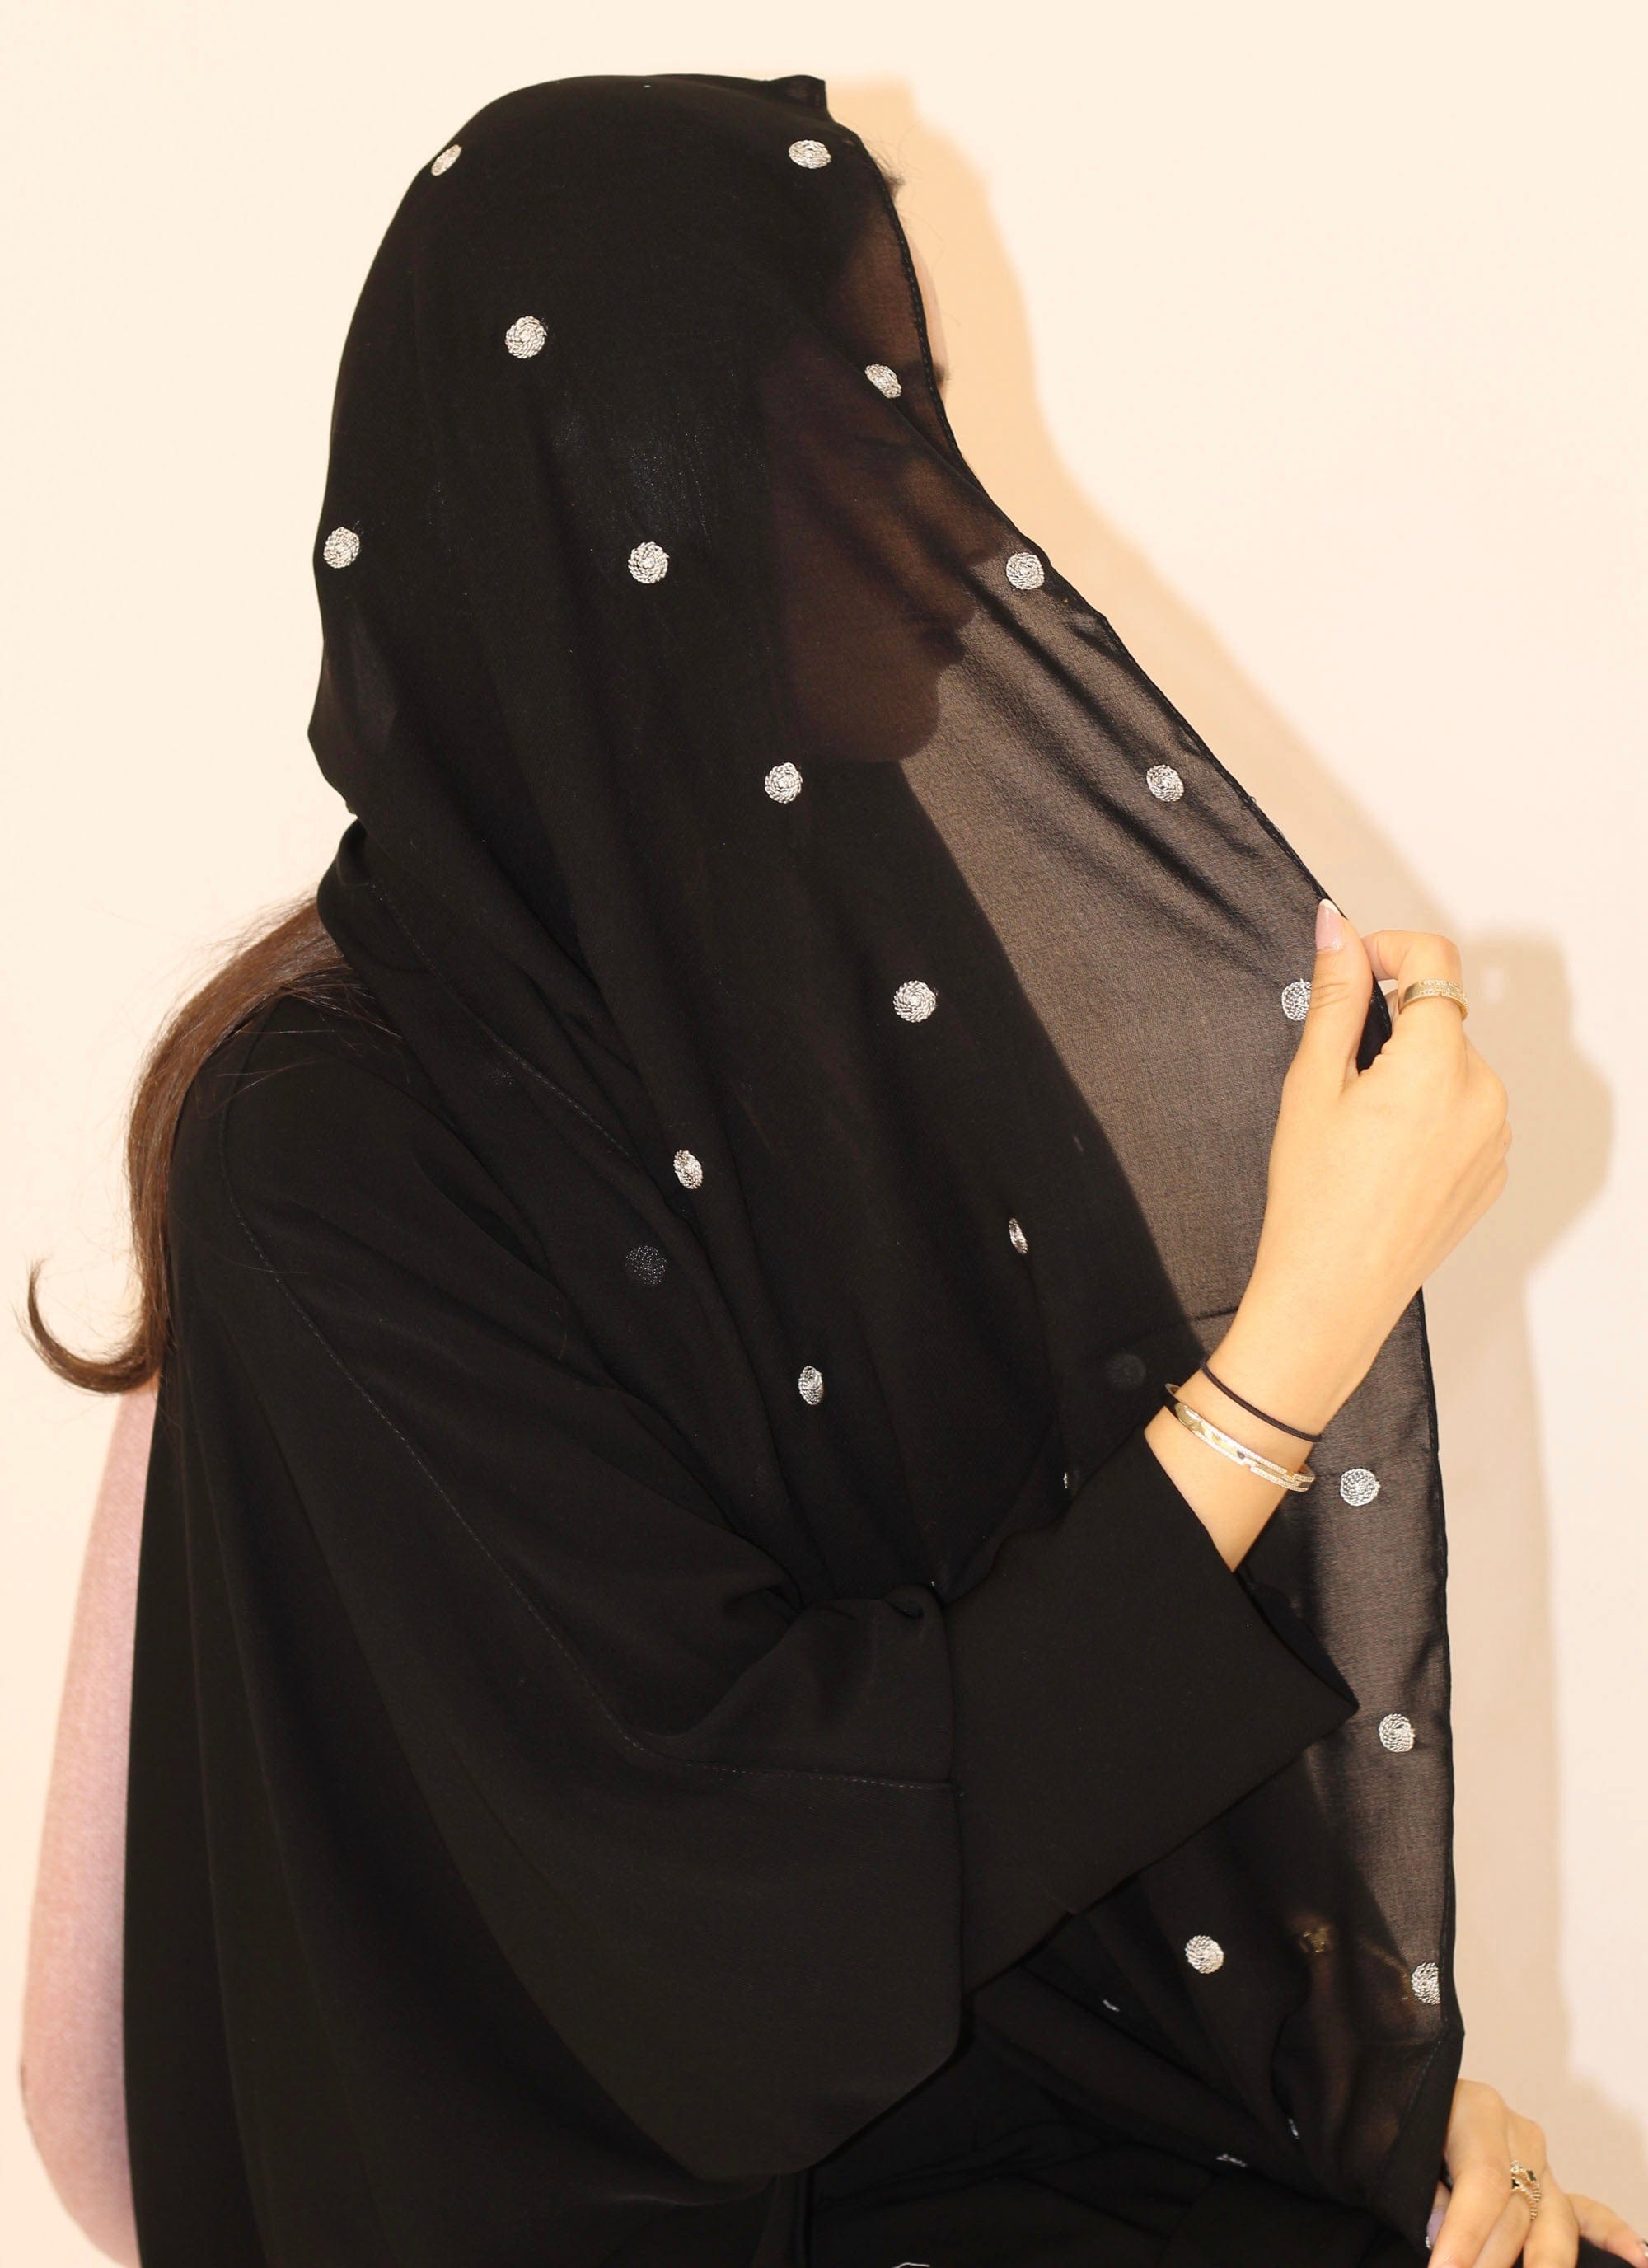 TA-232 Black veil with golden embroidery